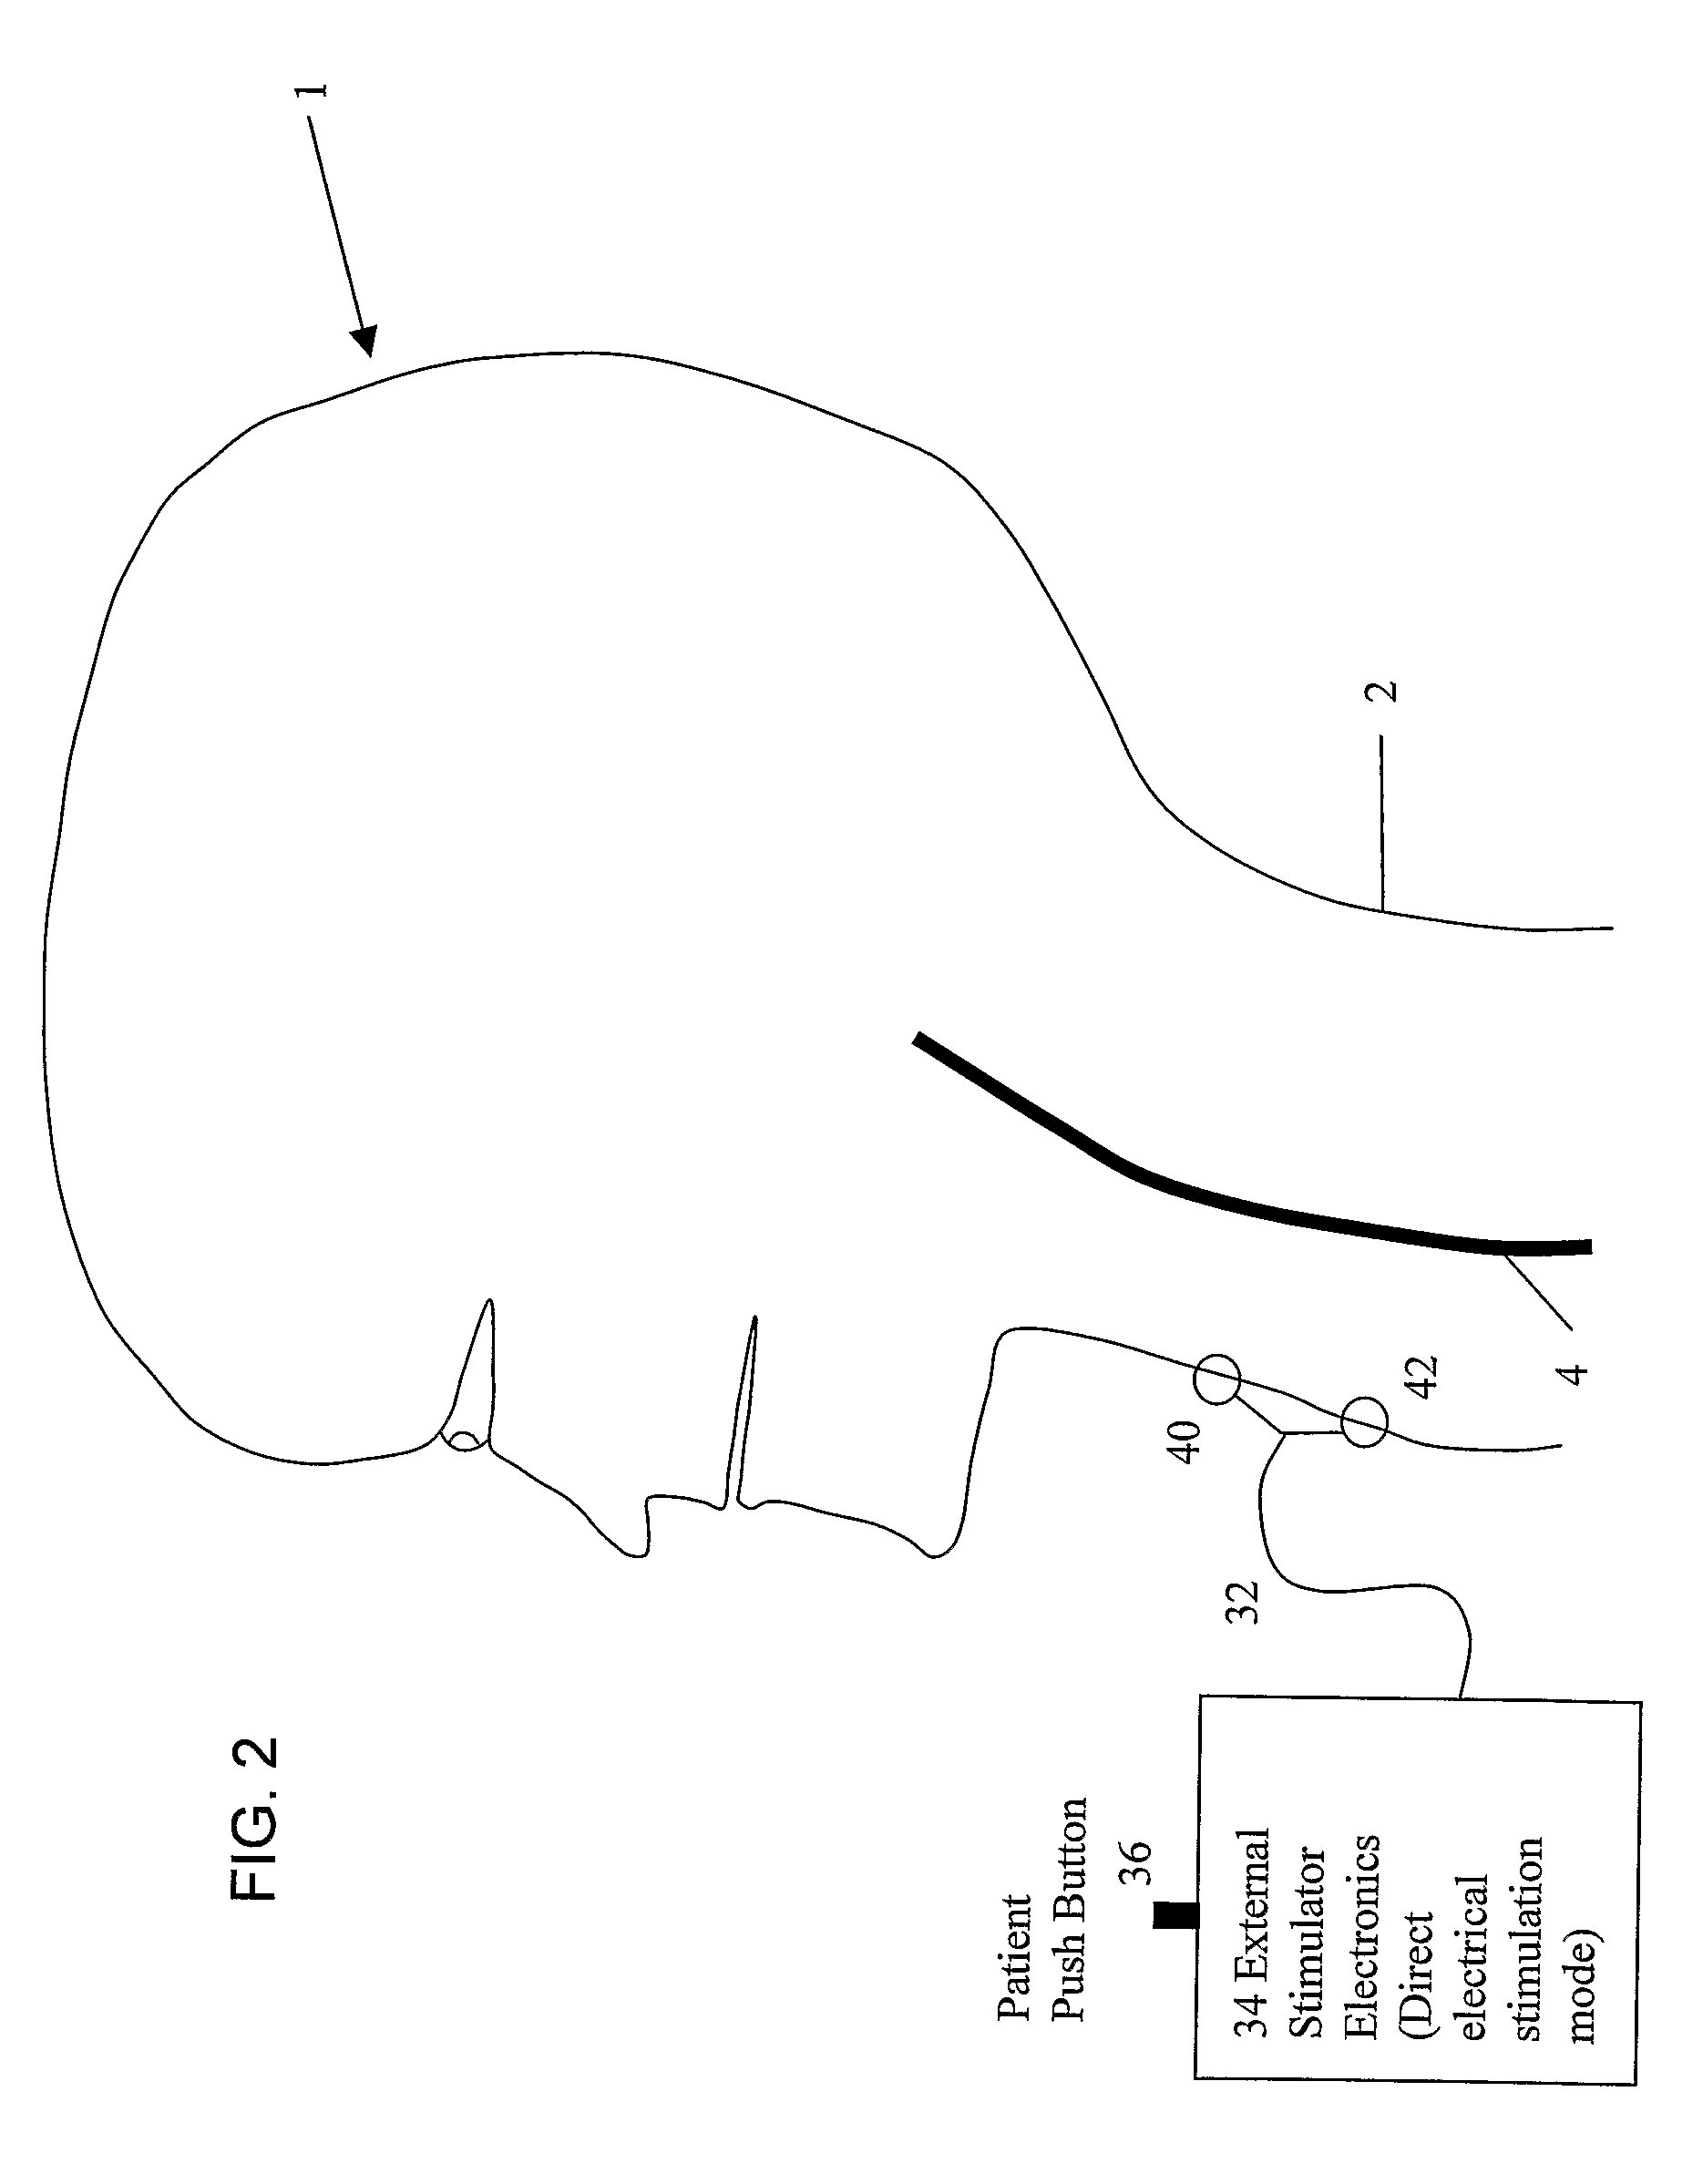 System and Method for Treating Nausea and Vomiting by Vagus Nerve Stimulation